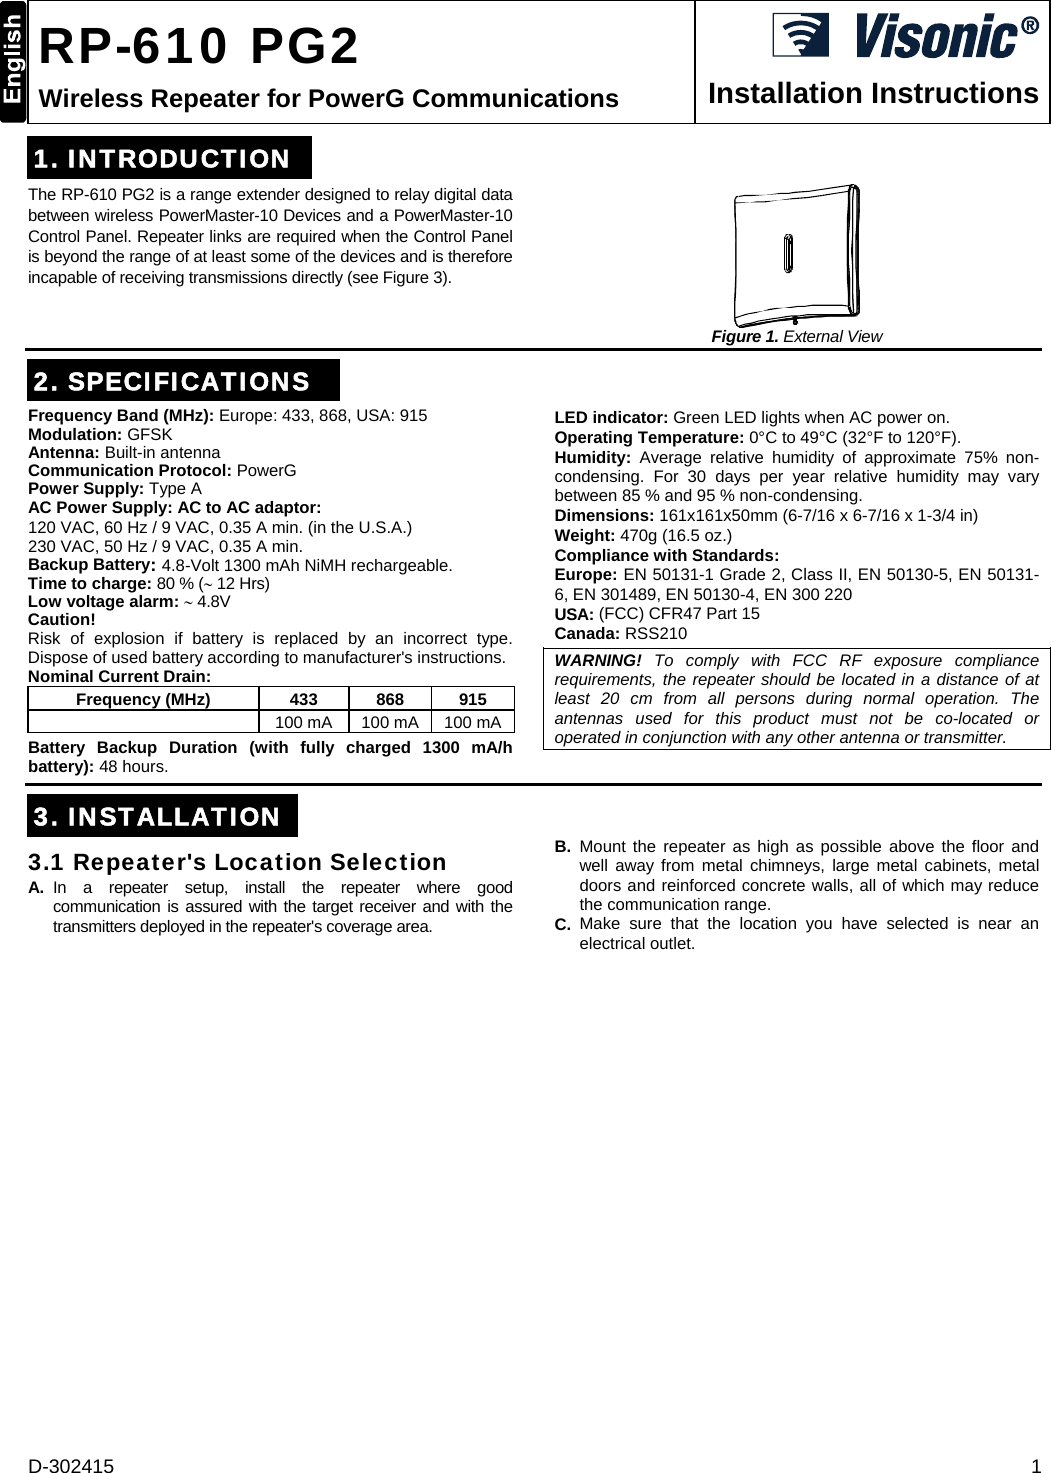 D-302415  1  RP-610 PG2 Wireless Repeater for PowerG Communications  Installation Instructions 1. INTRODUCTIONThe RP-610 PG2 is a range extender designed to relay digital data between wireless PowerMaster-10 Devices and a PowerMaster-10 Control Panel. Repeater links are required when the Control Panel is beyond the range of at least some of the devices and is therefore incapable of receiving transmissions directly (see Figure 3).    Figure 1. External View 2. SPECIFICATIONSFrequency Band (MHz): Europe: 433, 868, USA: 915 Modulation: GFSK Antenna: Built-in antenna Communication Protocol: PowerG Power Supply: Type A AC Power Supply: AC to AC adaptor: 120 VAC, 60 Hz / 9 VAC, 0.35 A min. (in the U.S.A.)  230 VAC, 50 Hz / 9 VAC, 0.35 A min. Backup Battery: 4.8-Volt 1300 mAh NiMH rechargeable. Time to charge: 80 % ( 12 Hrs) Low voltage alarm:  4.8V Caution! Risk of explosion if battery is replaced by an incorrect type. Dispose of used battery according to manufacturer&apos;s instructions. Nominal Current Drain:  Frequency (MHz)  433   868  915  100 mA  100 mA 100 mABattery Backup Duration (with fully charged 1300 mA/h battery): 48 hours. LED indicator: Green LED lights when AC power on. Operating Temperature: 0°C to 49°C (32°F to 120°F). Humidity:  Average relative humidity of approximate 75% non-condensing. For 30 days per year relative humidity may vary between 85 % and 95 % non-condensing. Dimensions: 161x161x50mm (6-7/16 x 6-7/16 x 1-3/4 in) Weight: 470g (16.5 oz.) Compliance with Standards:  Europe: EN 50131-1 Grade 2, Class II, EN 50130-5, EN 50131-6, EN 301489, EN 50130-4, EN 300 220  USA: (FCC) CFR47 Part 15 Canada: RSS210 WARNING! To comply with FCC RF exposure compliance requirements, the repeater should be located in a distance of at least 20 cm from all persons during normal operation. The antennas used for this product must not be co-located or operated in conjunction with any other antenna or transmitter.   3. INSTALLATION3.1 Repeater&apos;s Location Selection  A. In a repeater setup, install the repeater where good communication is assured with the target receiver and with the transmitters deployed in the repeater&apos;s coverage area. B. Mount the repeater as high as possible above the floor and well away from metal chimneys, large metal cabinets, metal doors and reinforced concrete walls, all of which may reduce the communication range. C. Make sure that the location you have selected is near an electrical outlet.